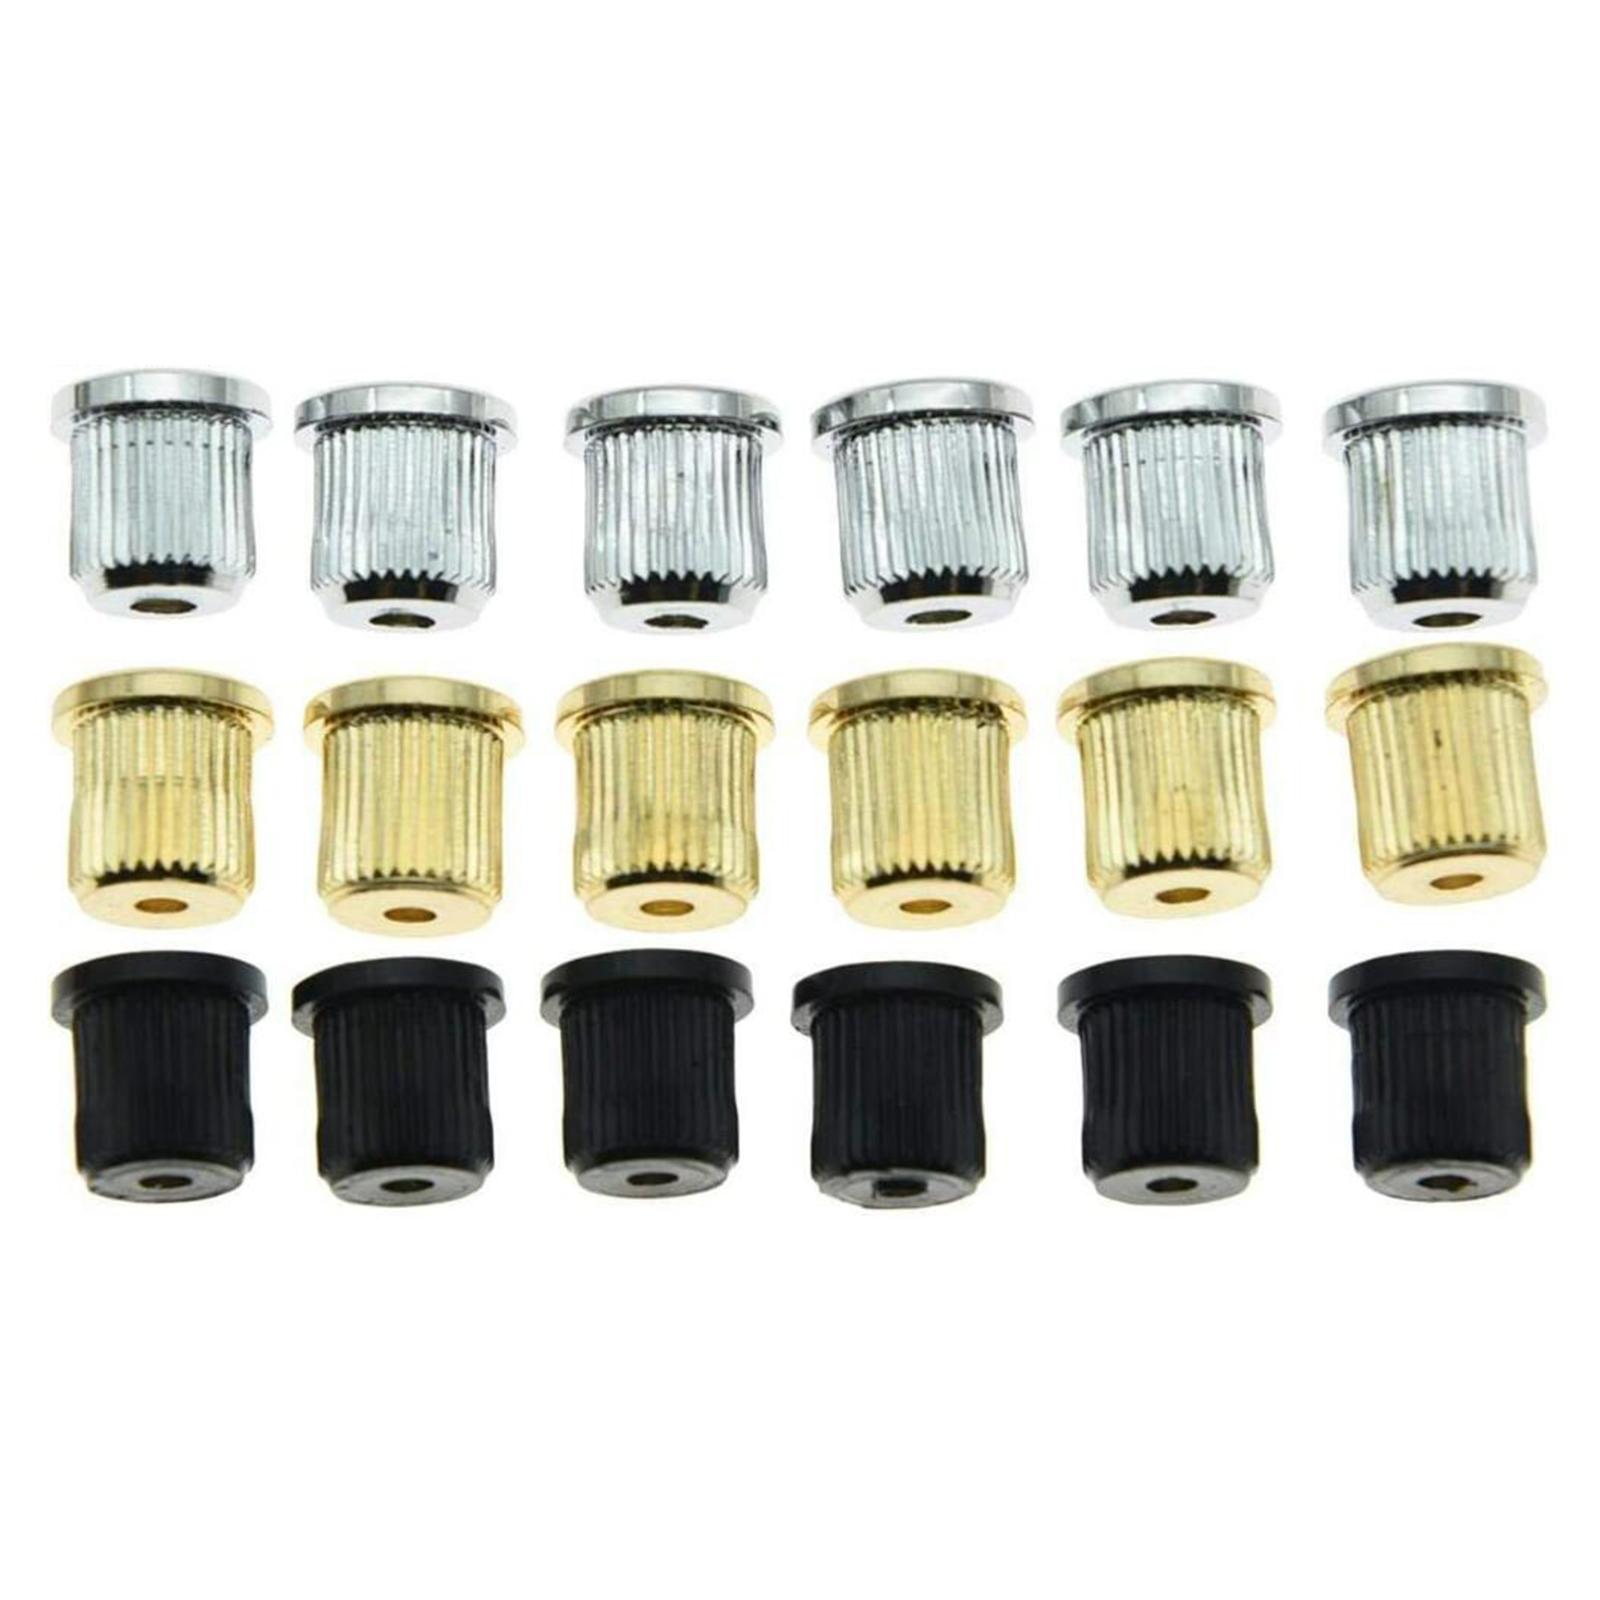 6x Guitar String Grommet Ferrule Assembly Replacement Part for Electric Guitar